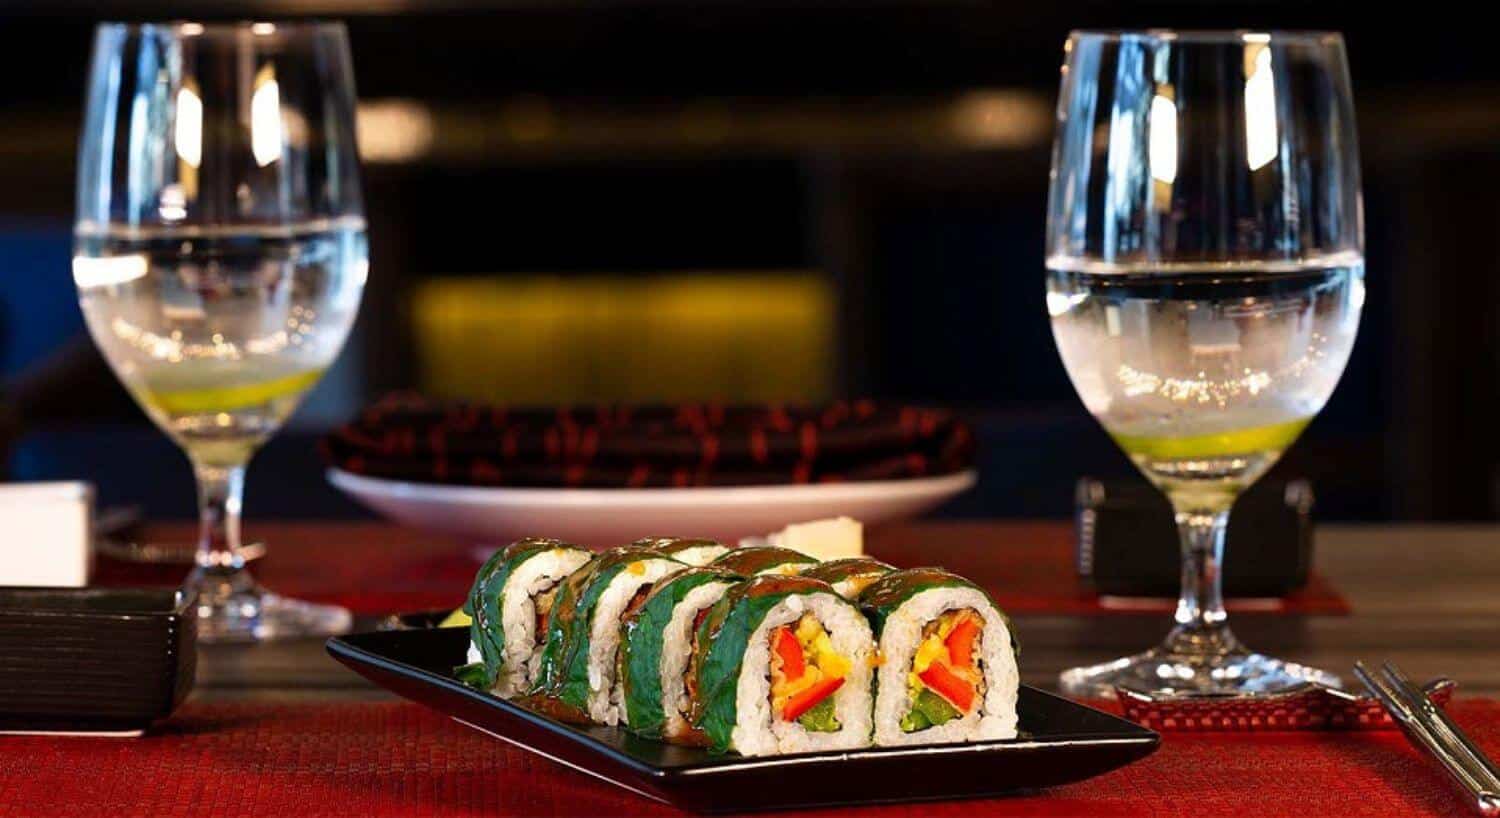 A black rectangular plate filled with 8 sushi rolls of cooked rice, fresh vegetables, and wrapped in seaweed, with 2 glasses of water next to it, on a table with red placemats.